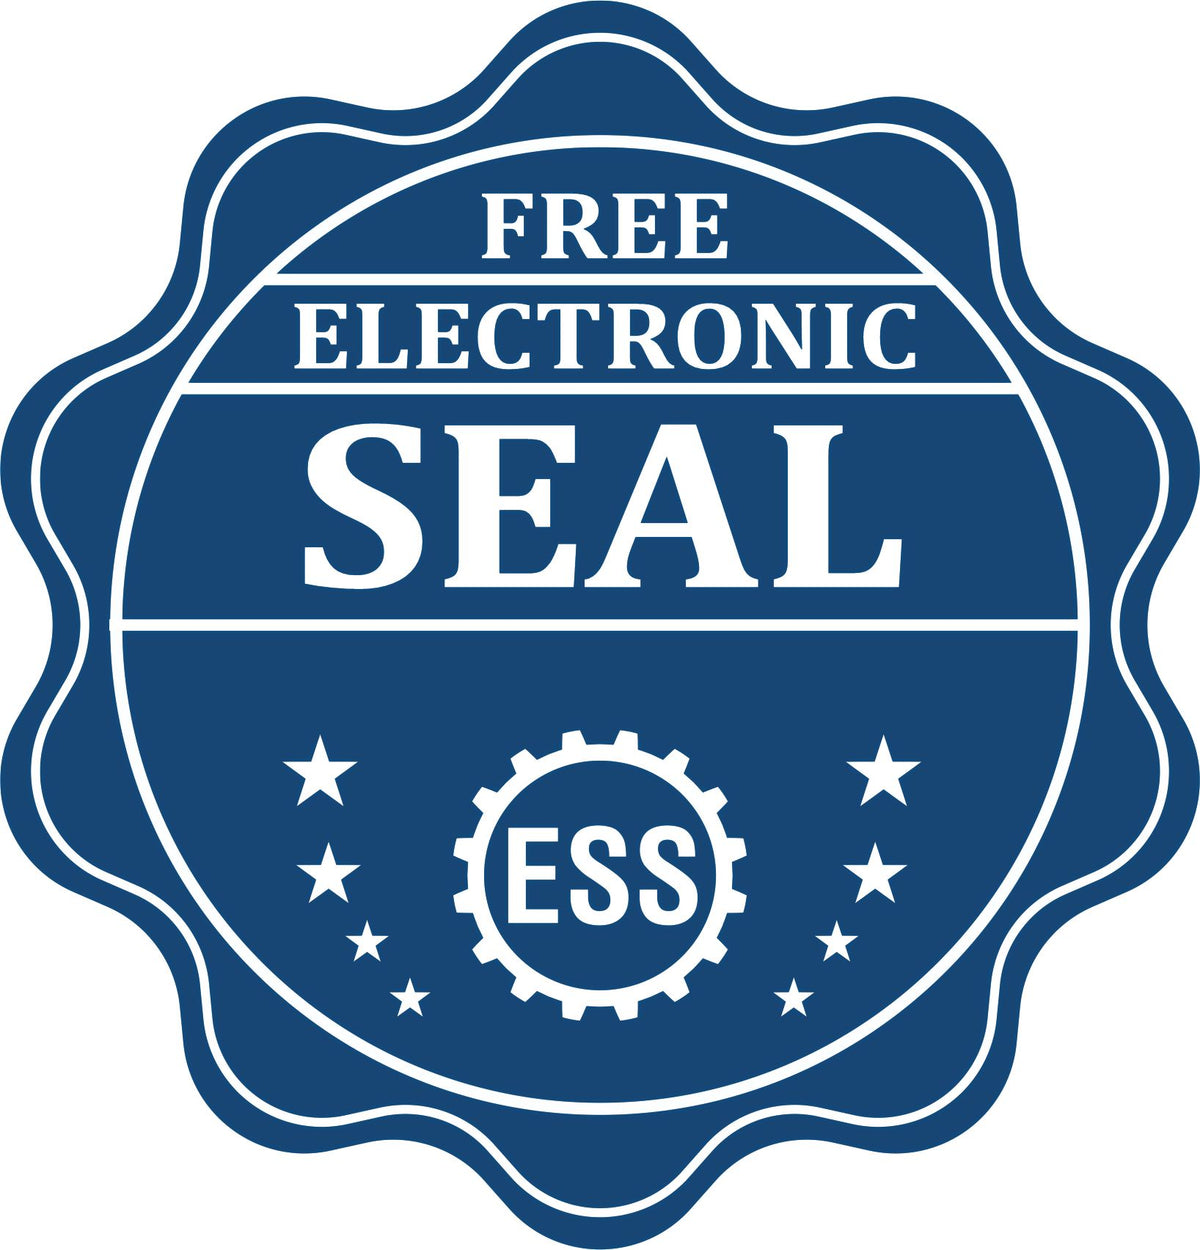 A badge showing a free electronic seal for the Soft New Jersey Professional Geologist Seal with stars and the ESS gear on the emblem.